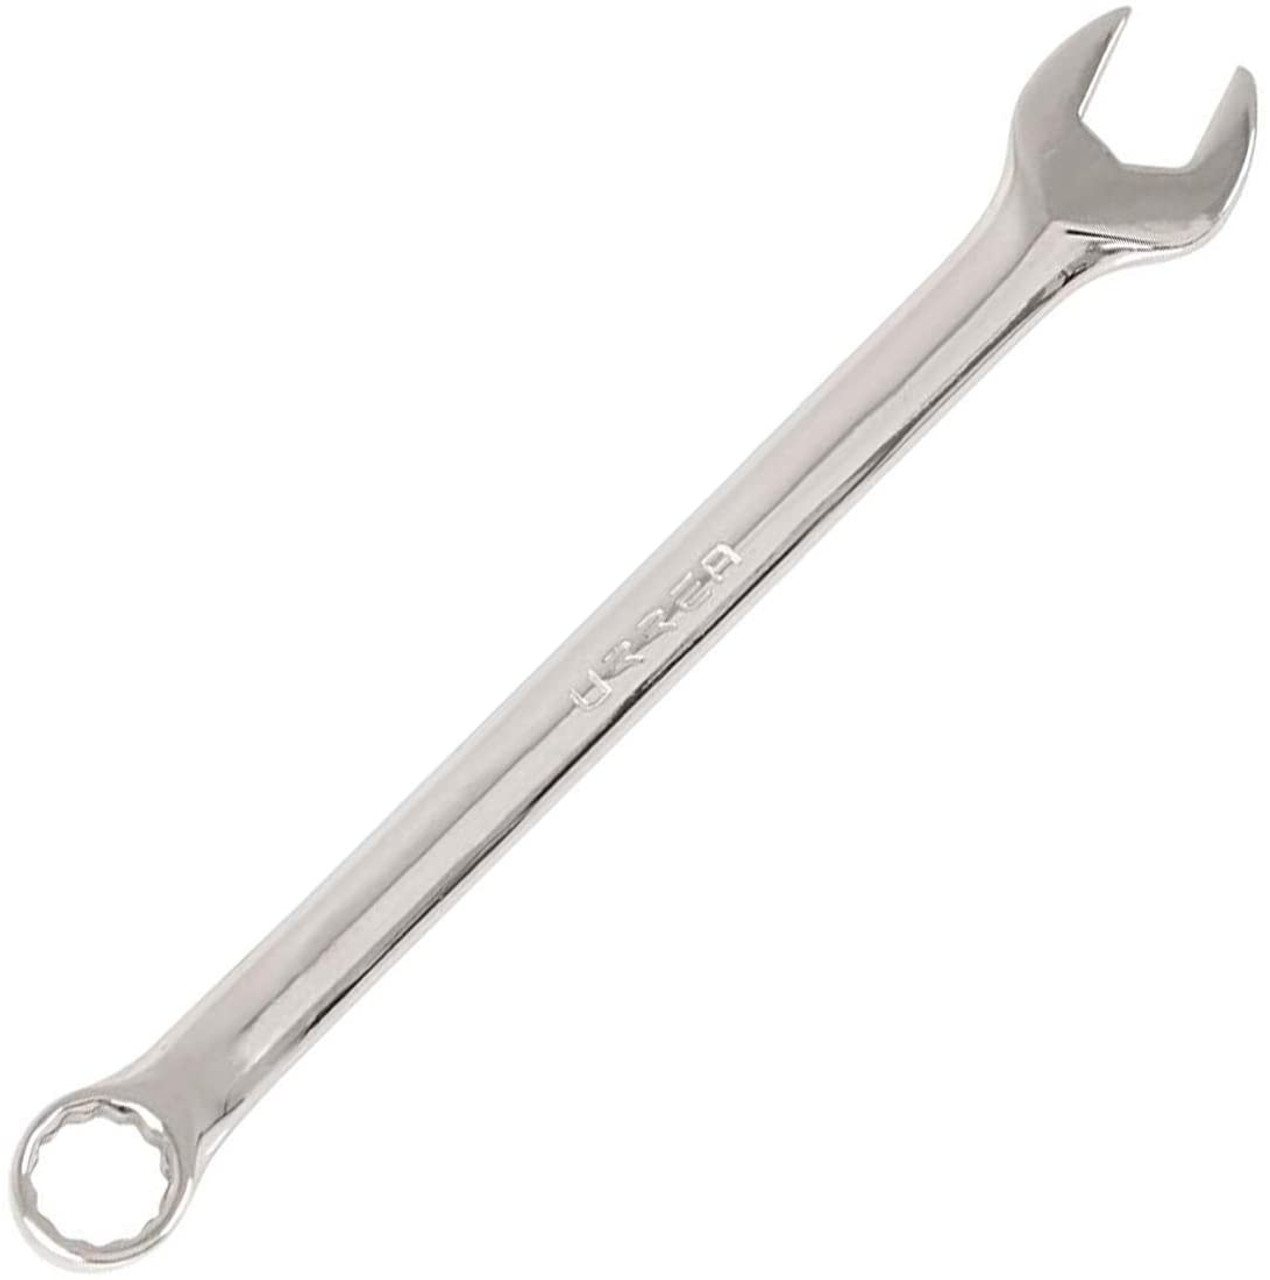 Full polished combination wrench, Size: 12mm, 12 point, Tool Length: 7-1/16"